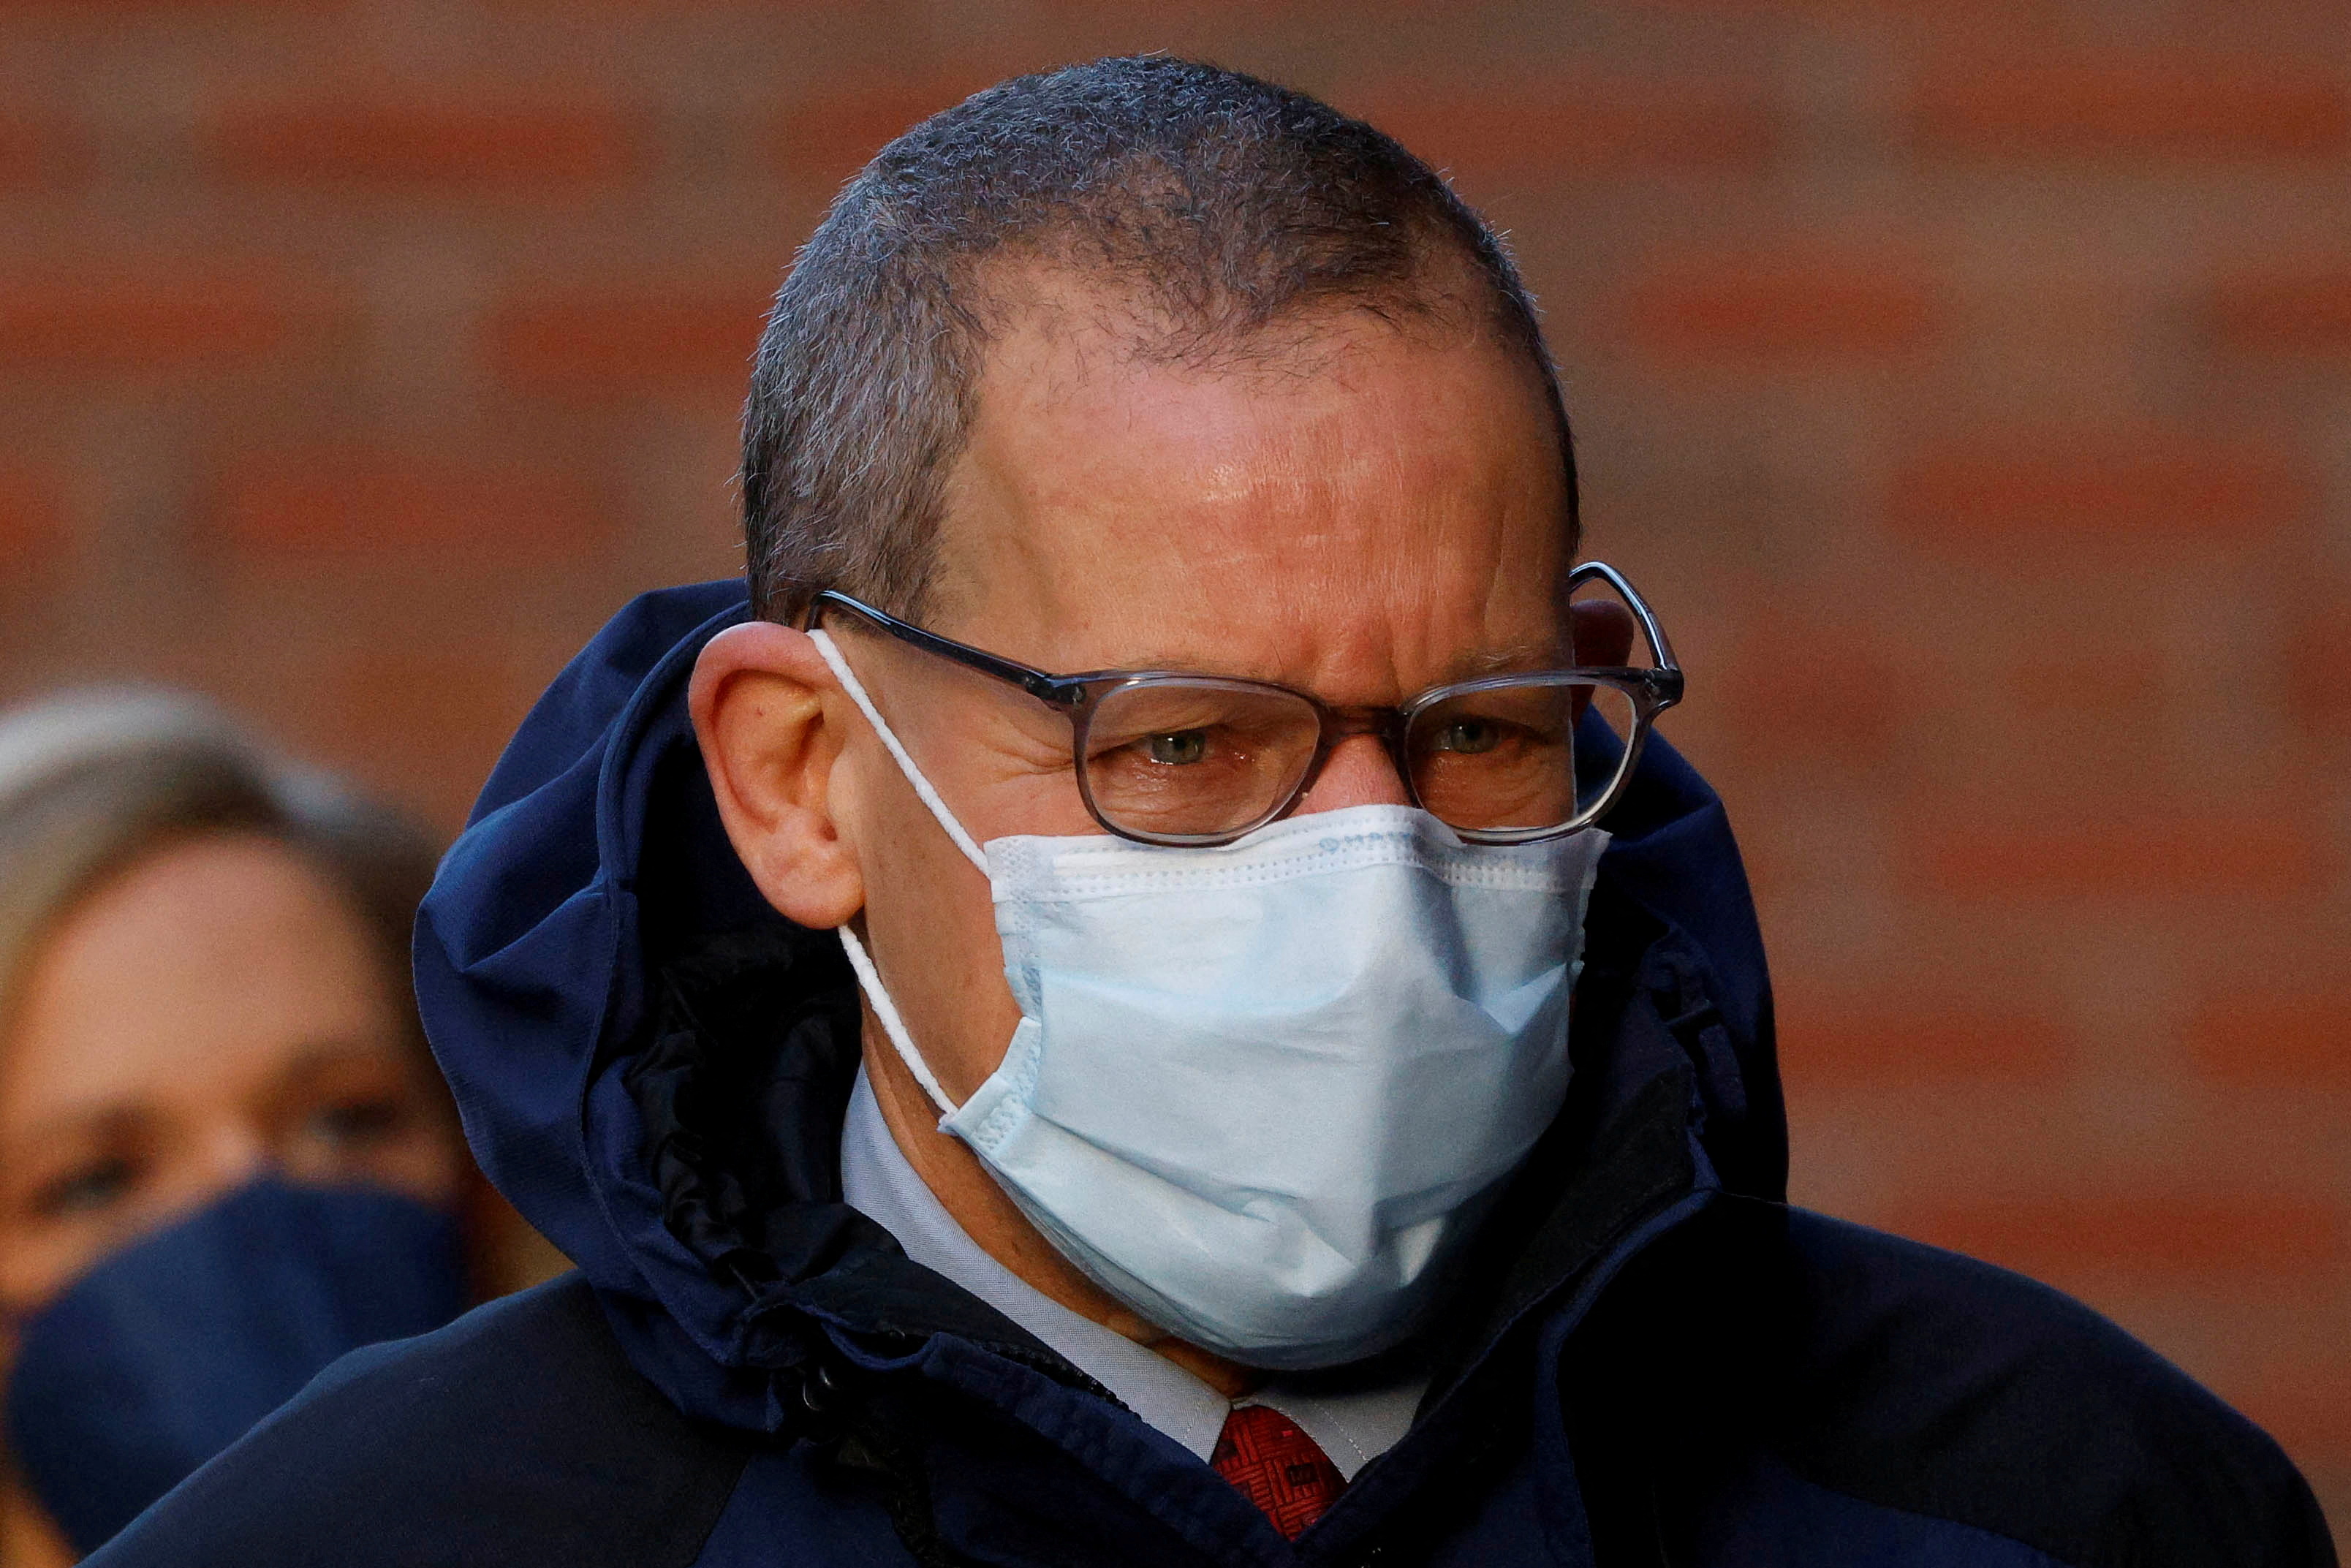 Harvard University nanotechnology professor Charles Lieber, who is charged with lying to U.S. authorities about his ties to a China-run recruitment program and funding he allegedly received from the Chinese government for research, arrives at the federal courthouse in Boston, Massachusetts, U.S., December 14, 2021. REUTERS/Brian Snyder